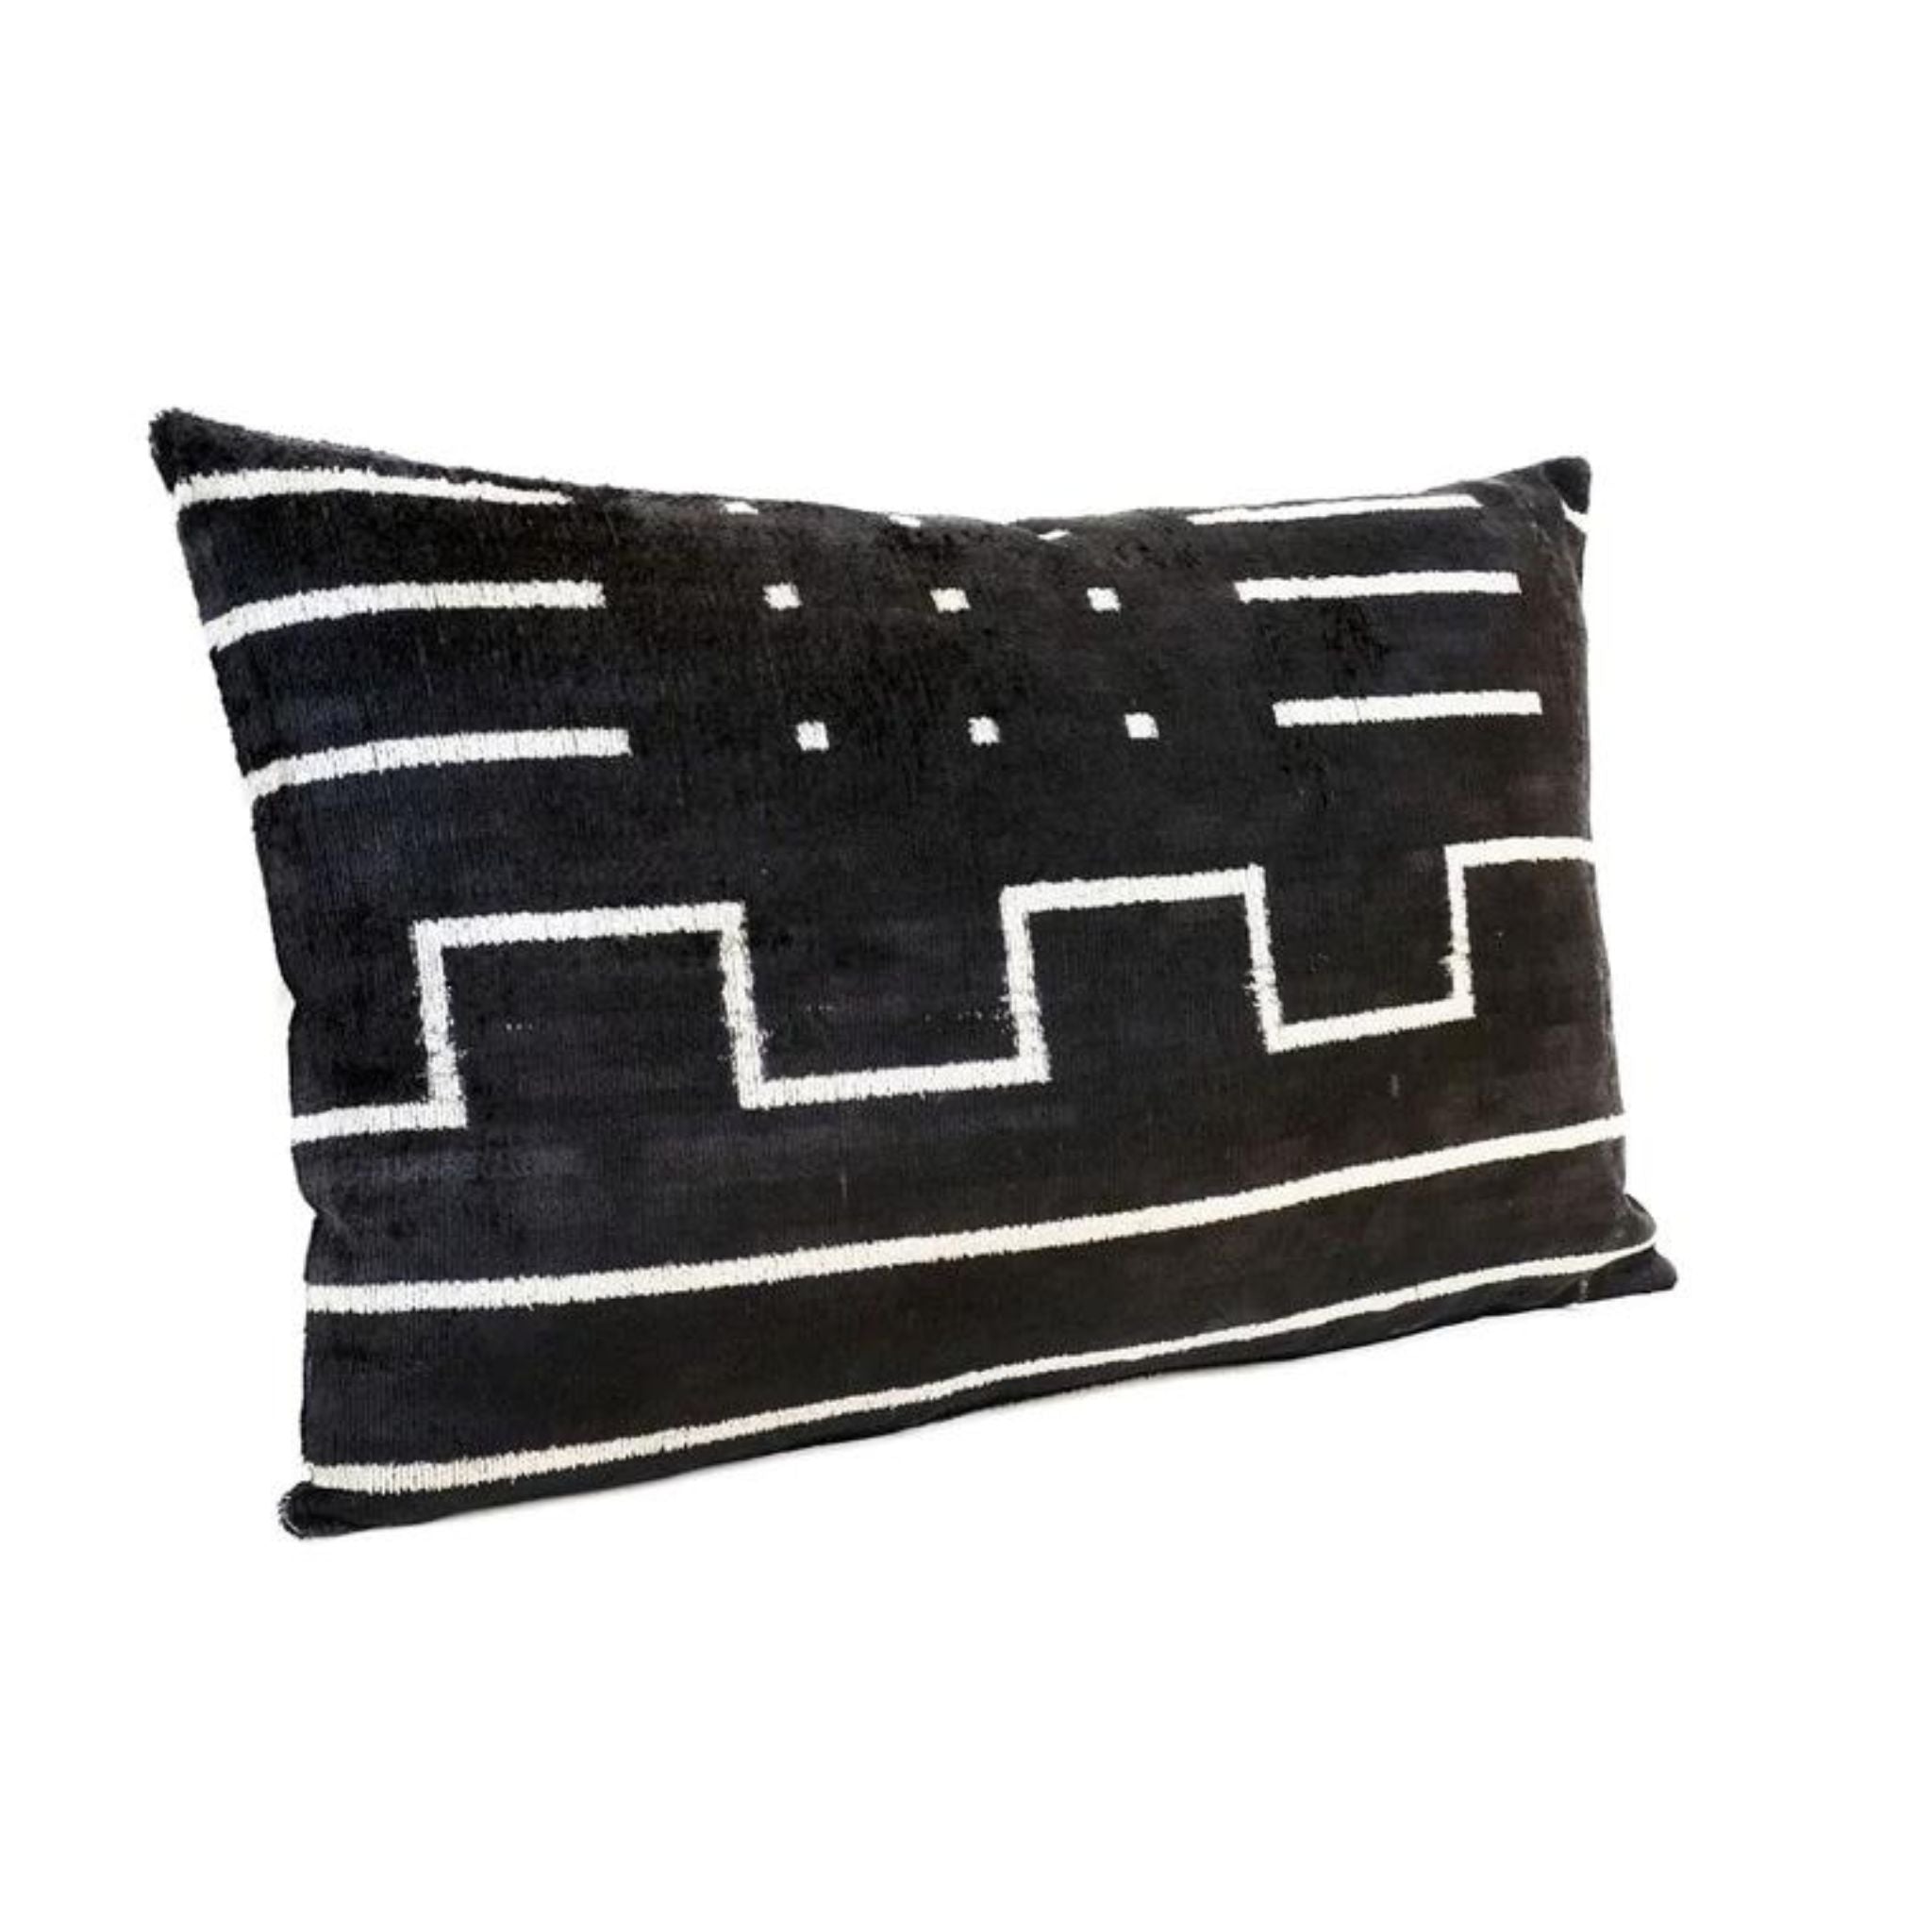 MIRIAM THROW PILLOW - Simply Elevated Home Furnishings 